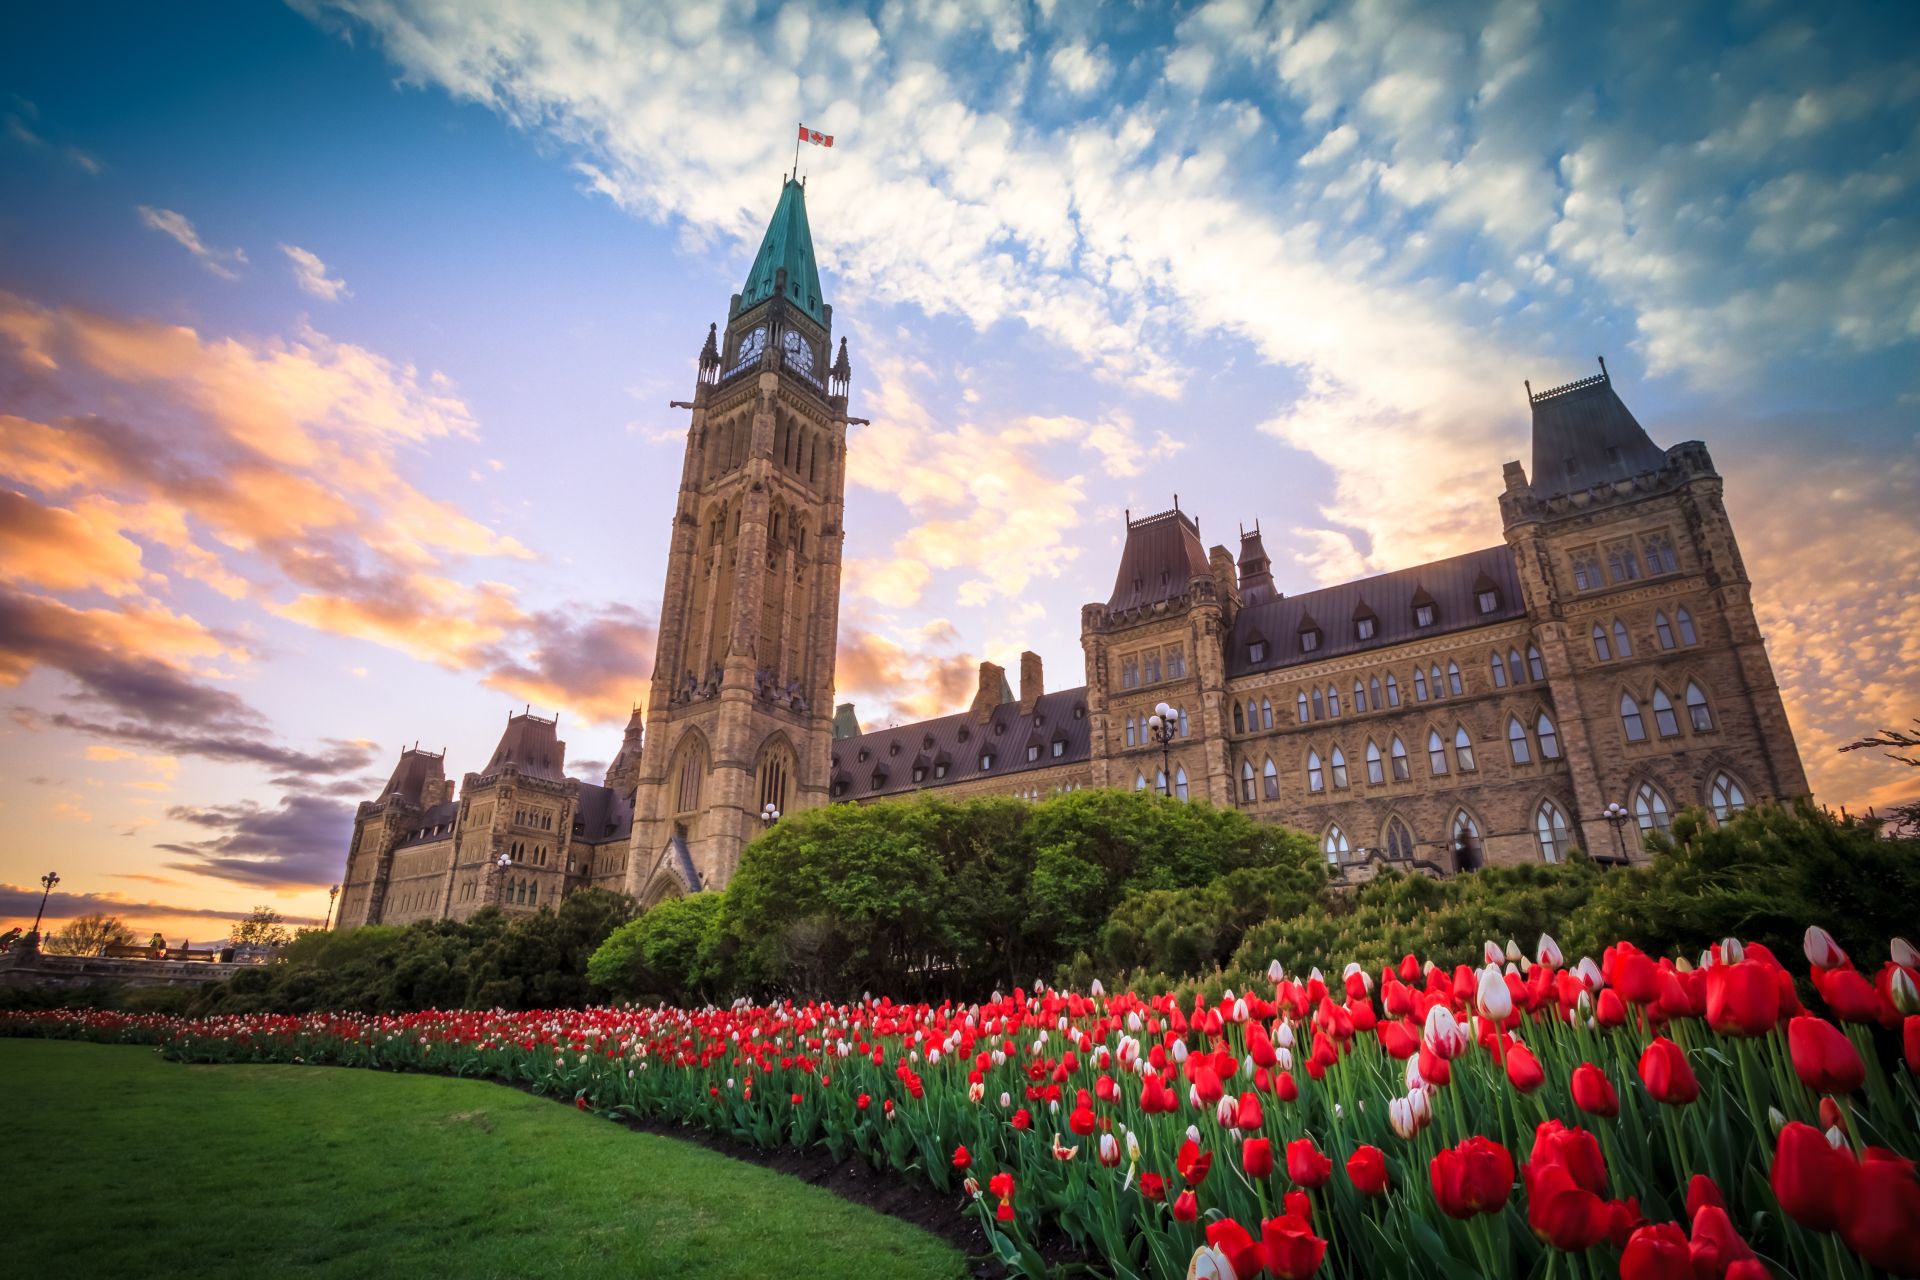 View of the Canadian Parliament building in Ottawa